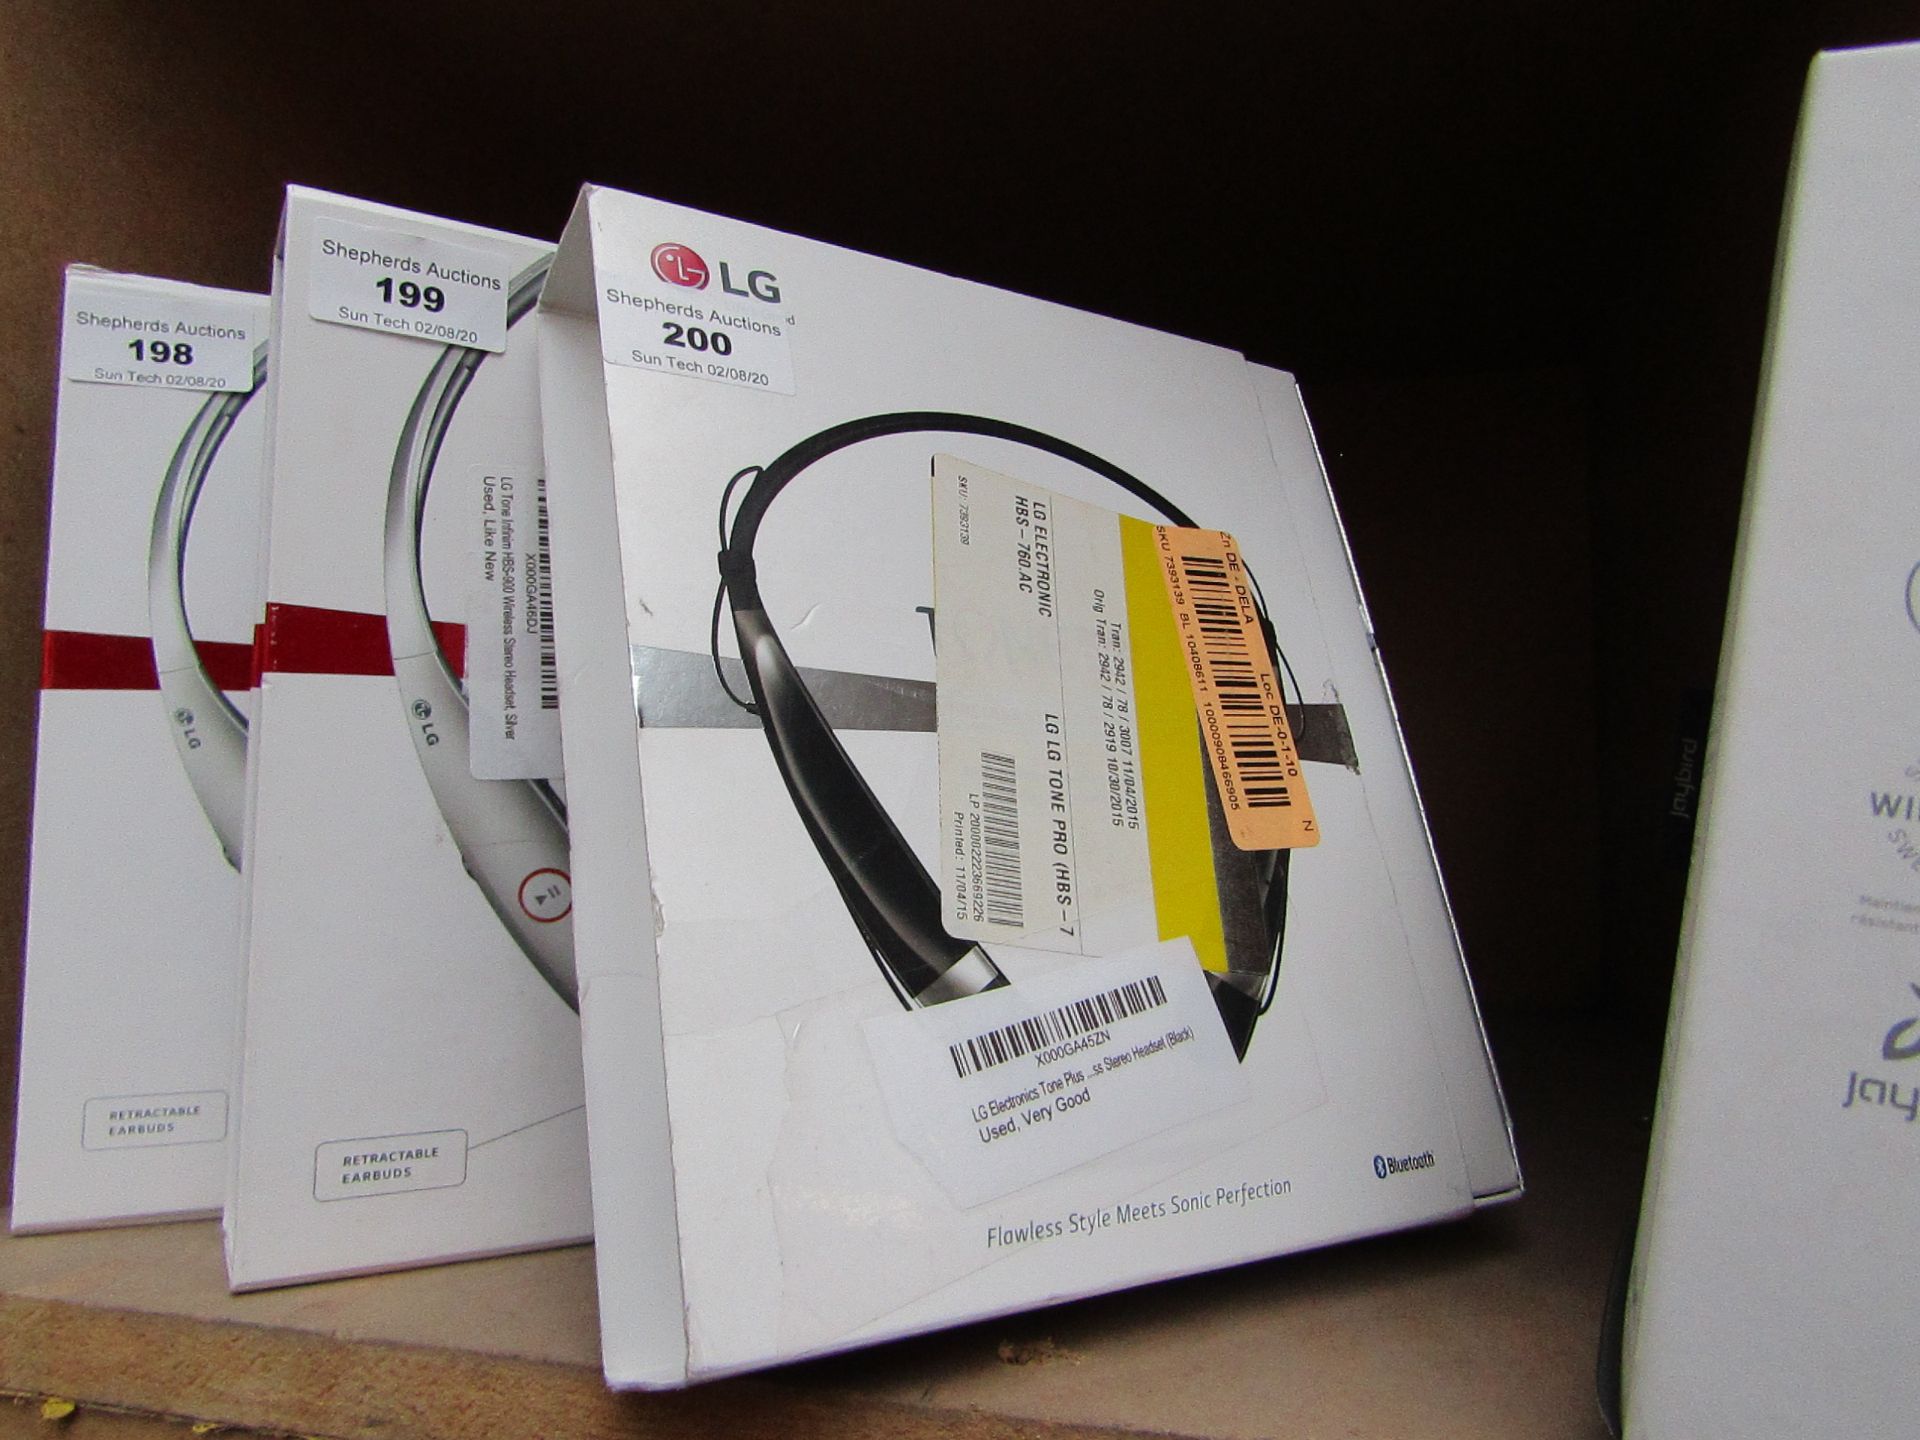 LG Tone Plus earphones, untested and boxed.